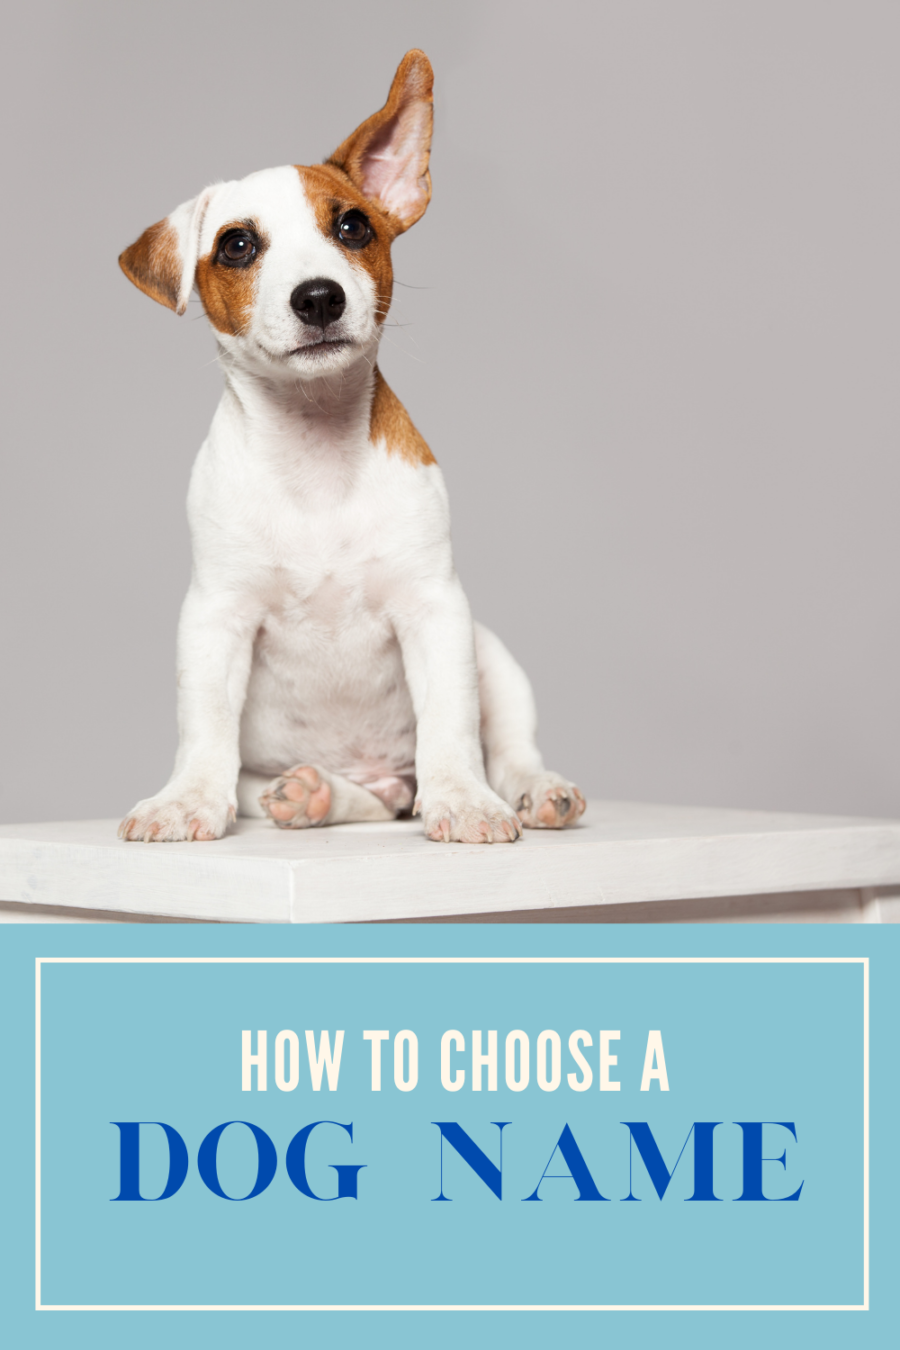 How to Choose a Name for a Dog: 8 Tips